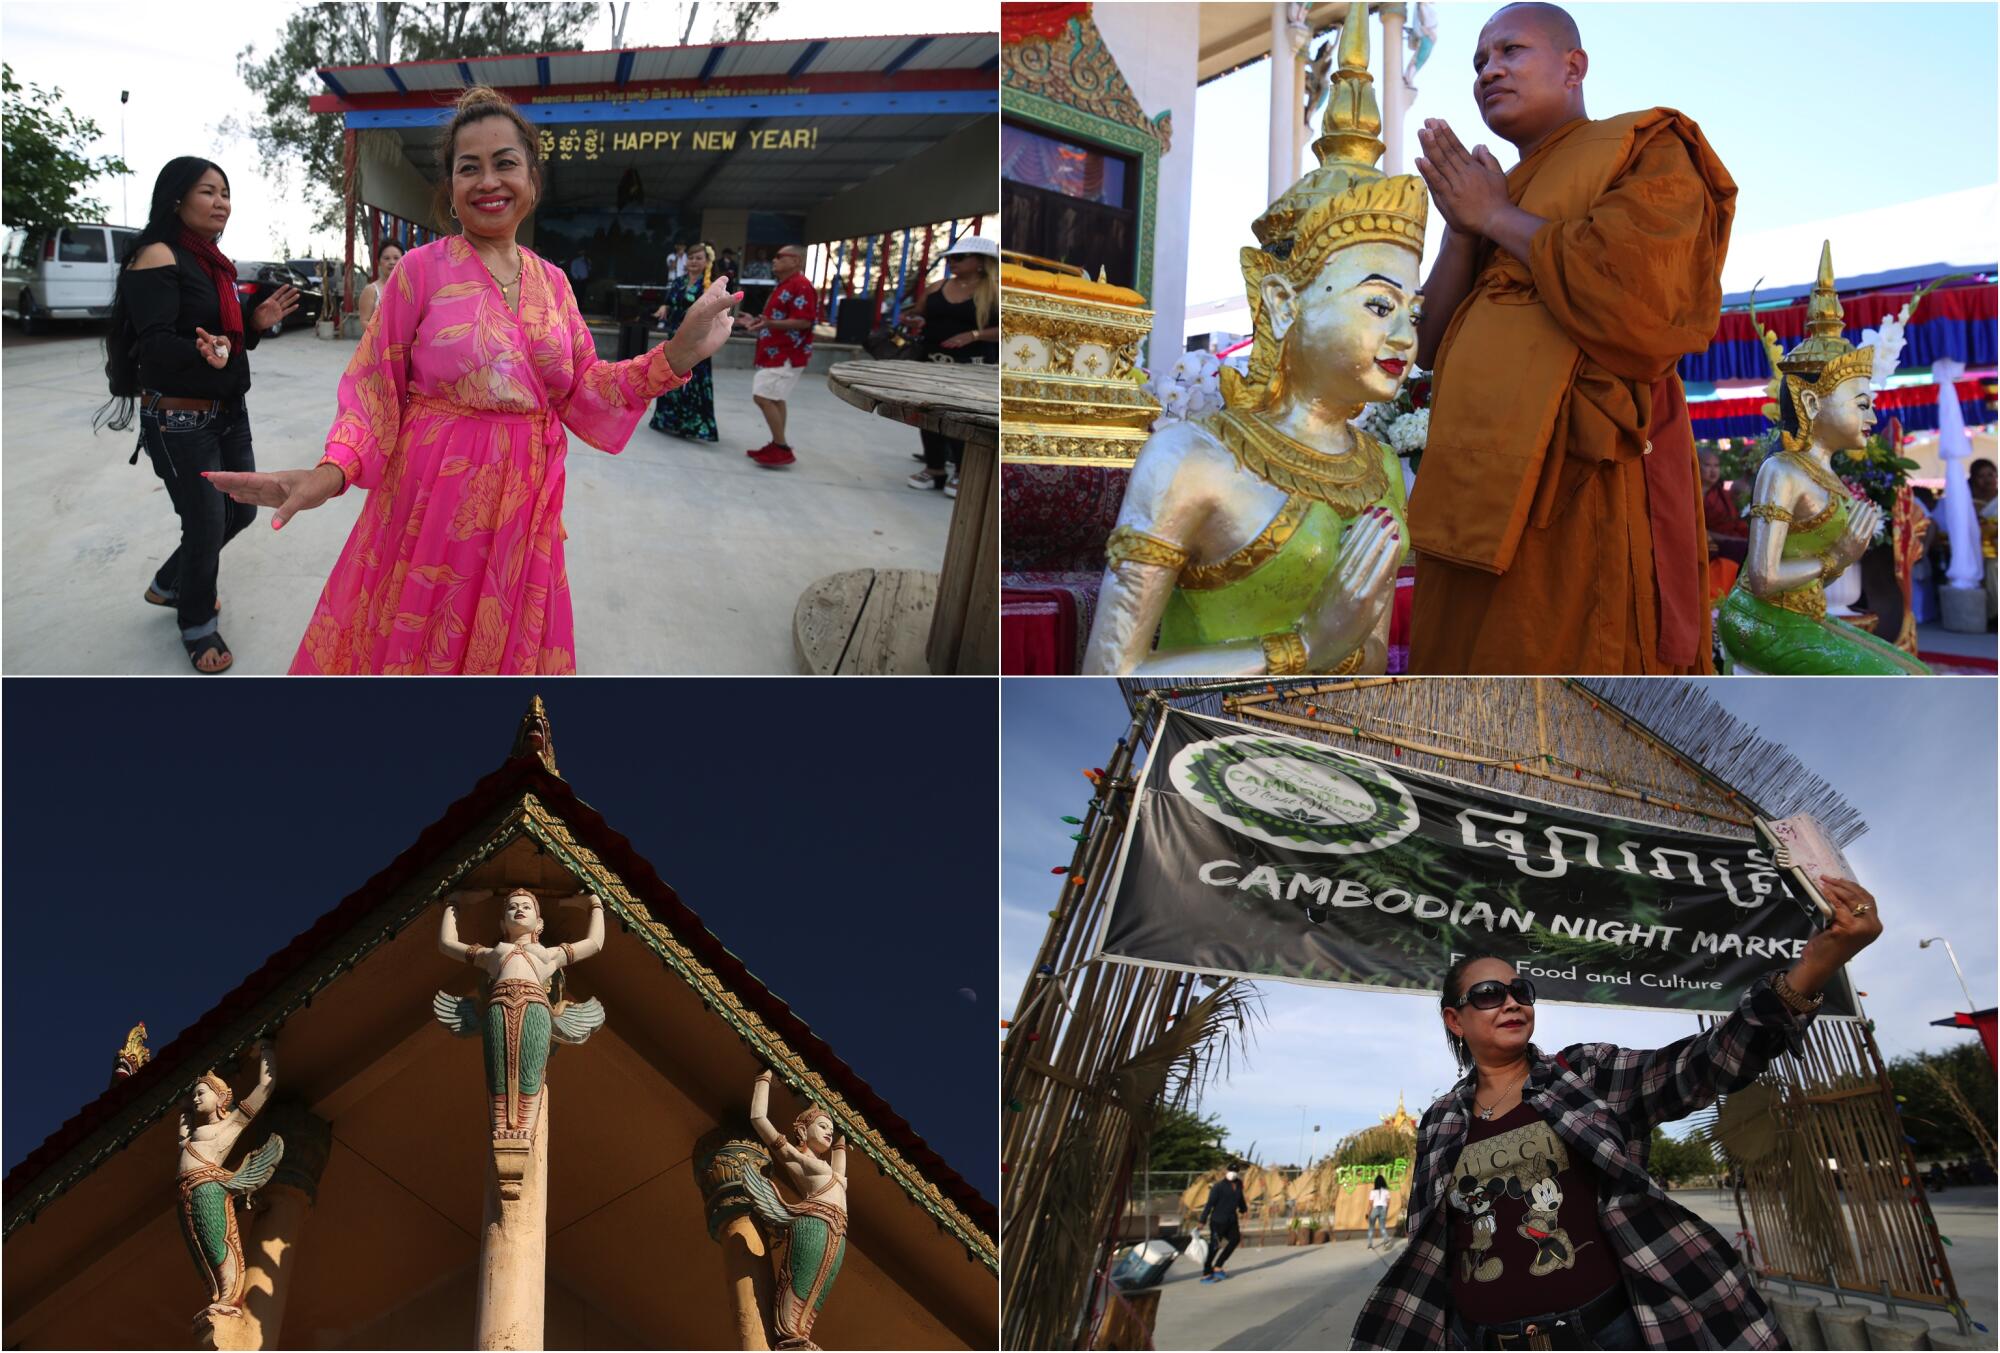 An Touch dances at the Cambodian Night Market; Say Bunthon during a ceremony; Yvonna Chan gets a selfie; and angelic statues.